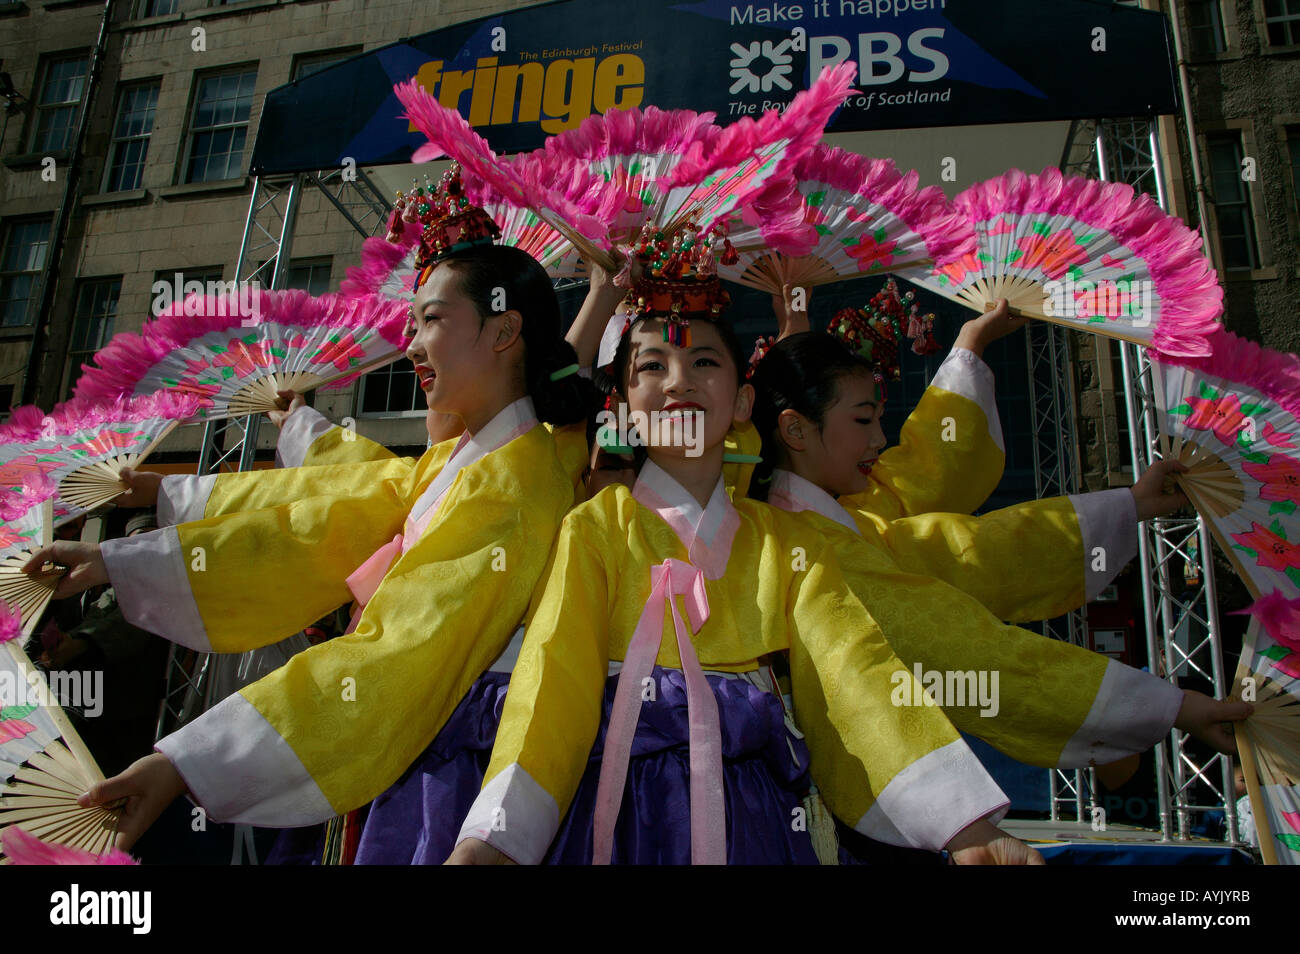 Young Korean dancers with fans promoting their stage show Edinburgh Fringe Festival, Scotland Stock Photo